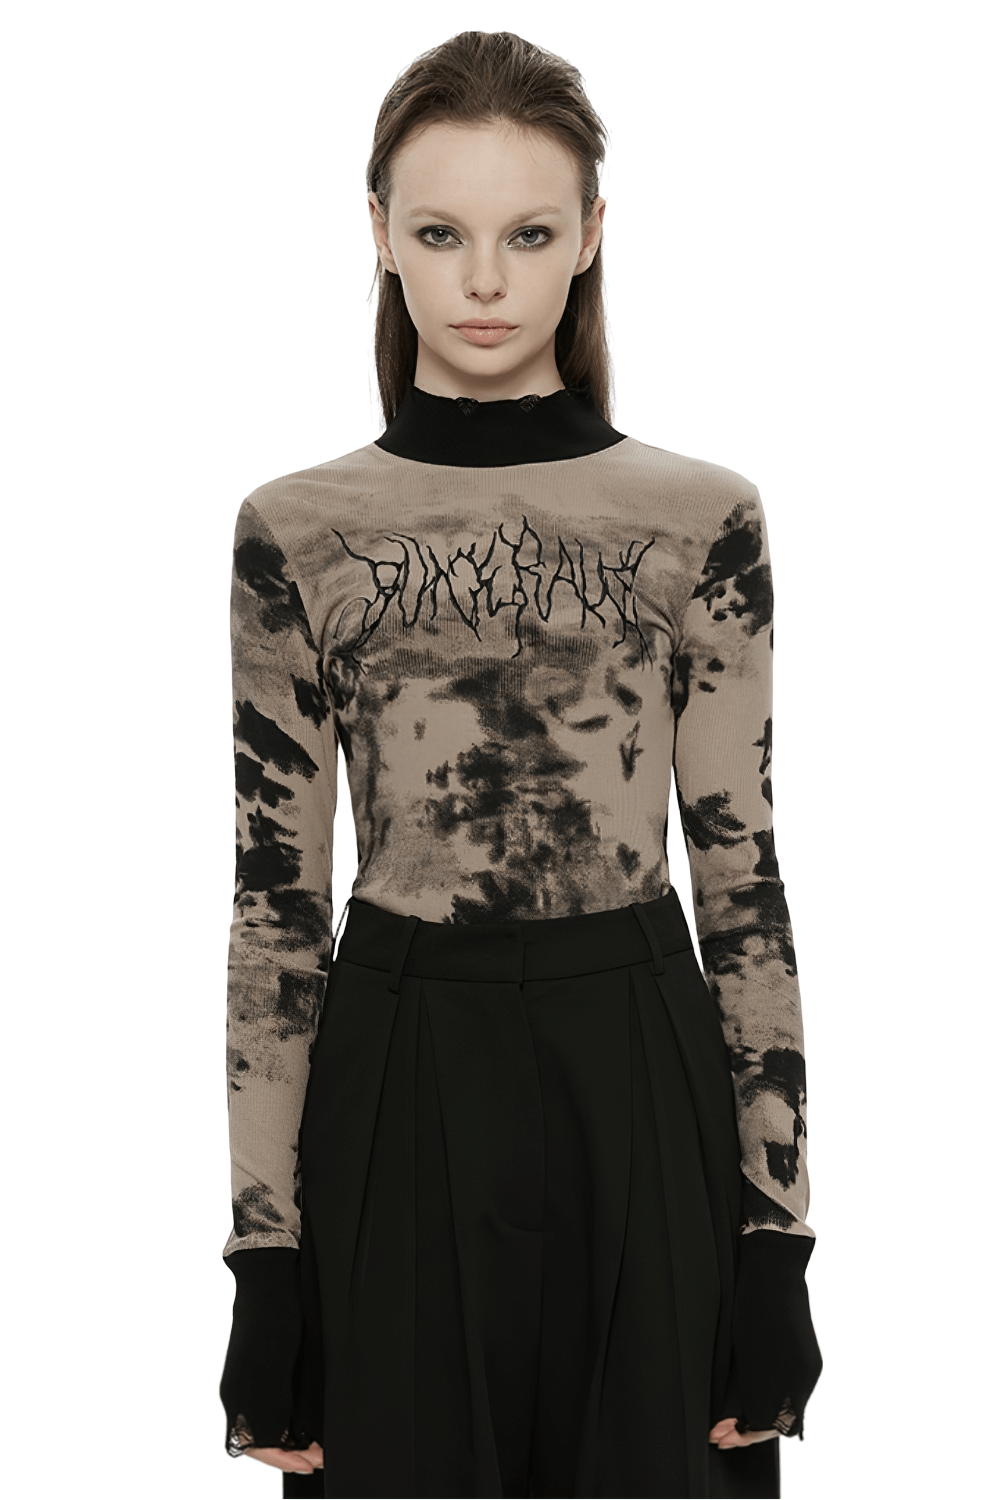 Stylish Tie Dye Turtleneck Top with Ripped Cuffs